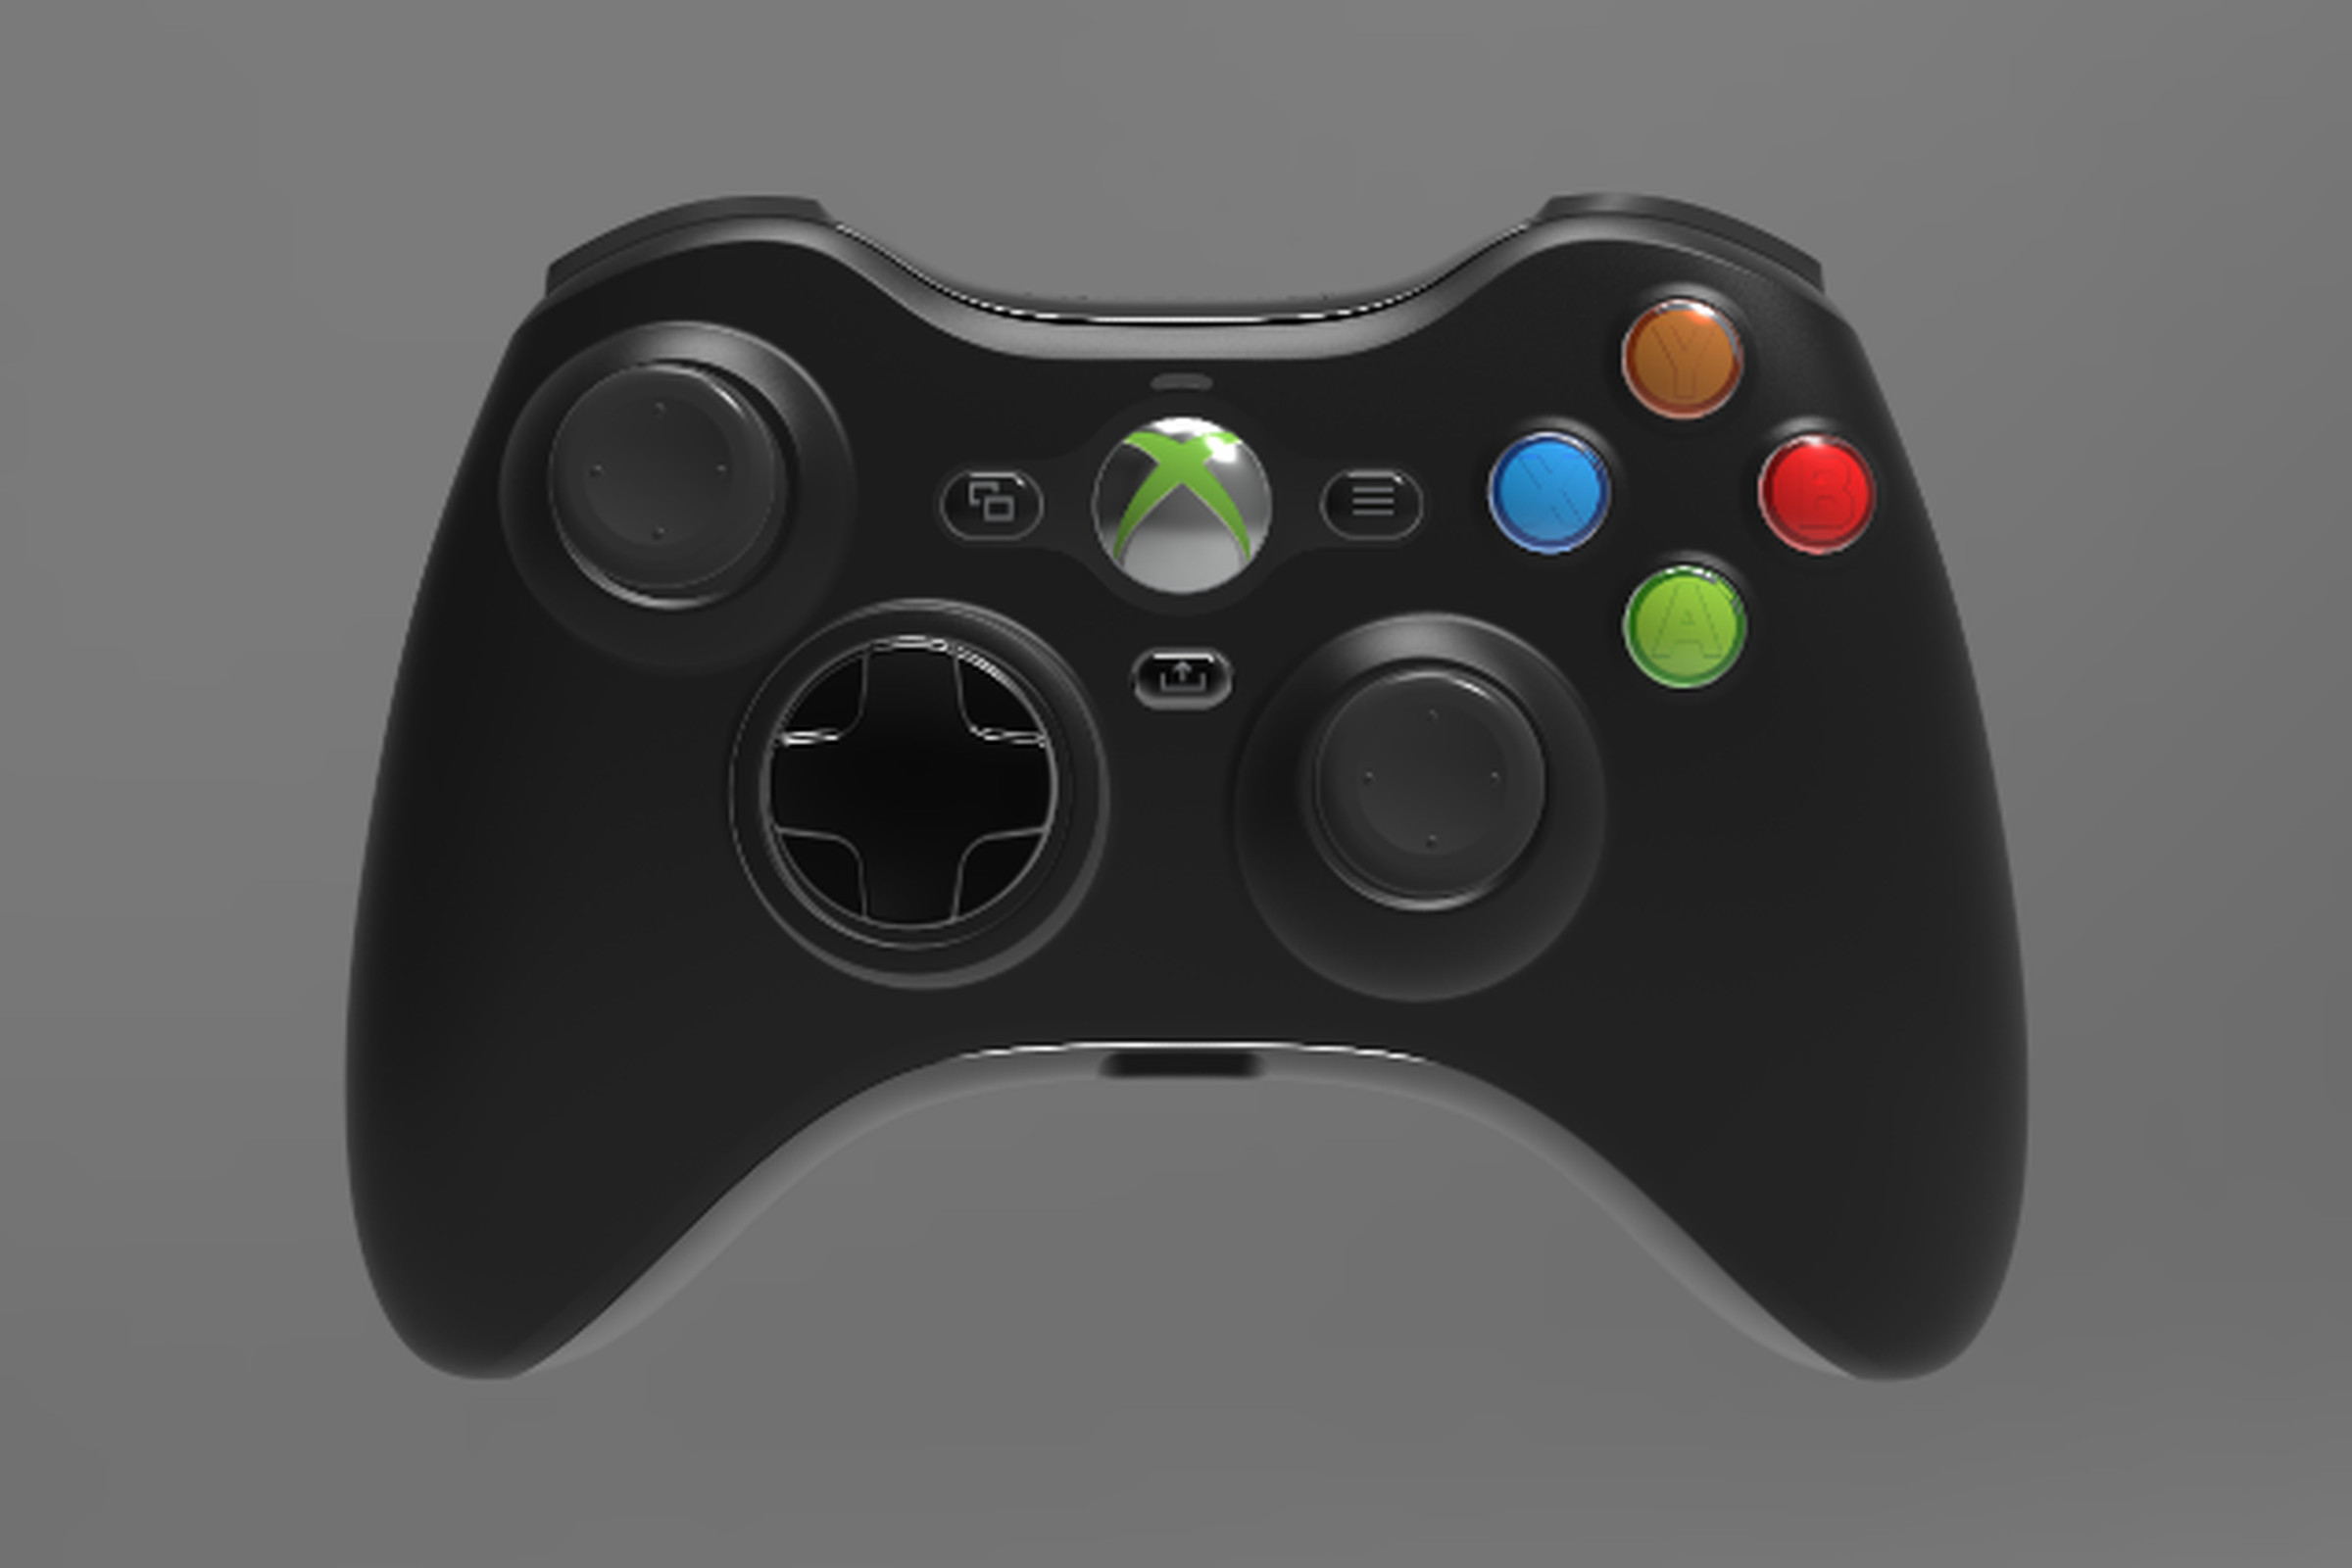 Hyperkin’s Xbox 360 controller reissue now has a price and release date